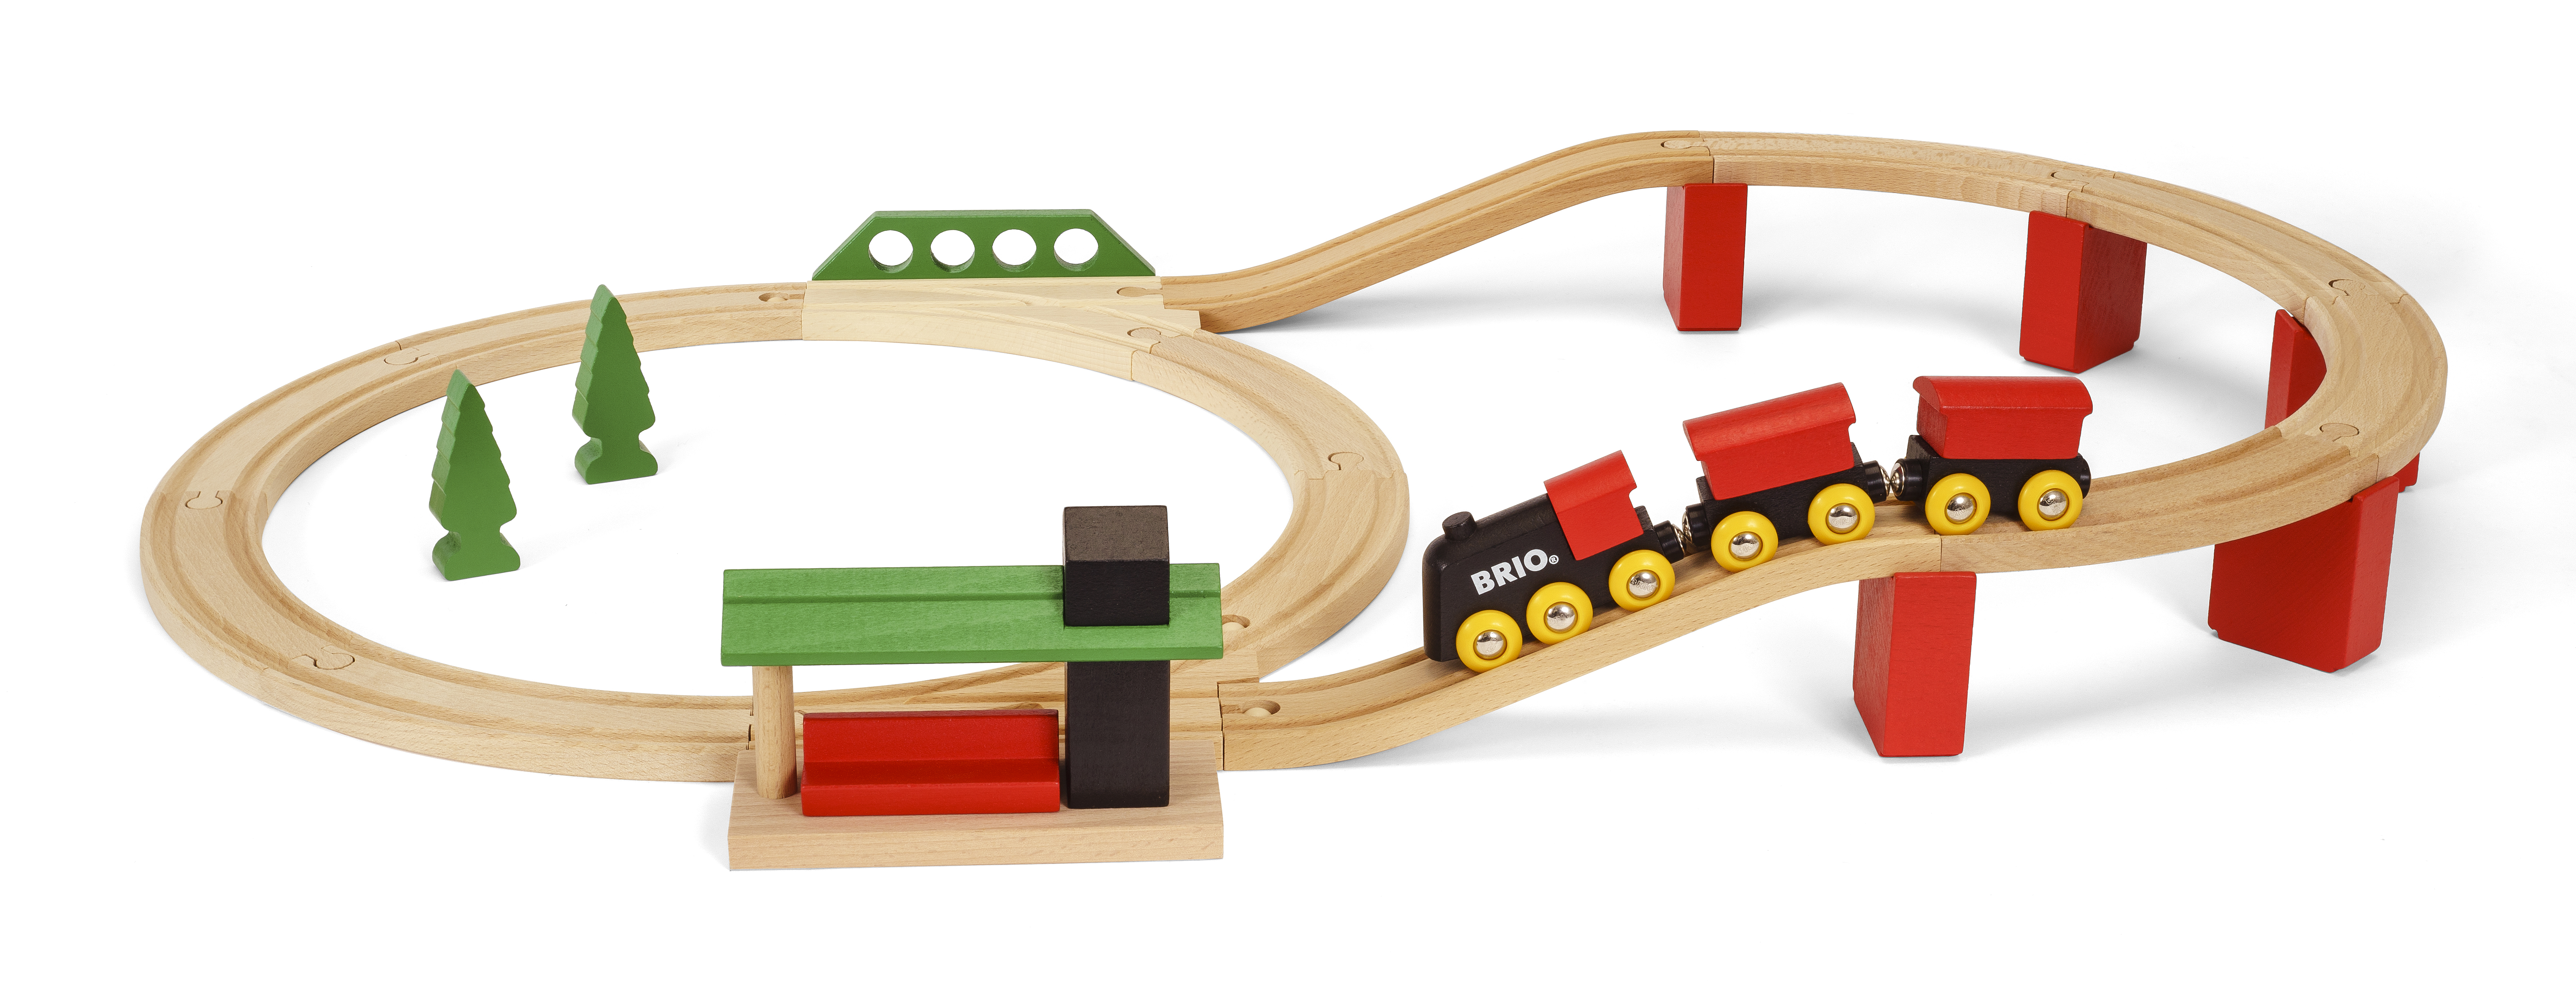 BRIO World Classic Deluxe Wooden Railway Train Set - Ages 2+ - image 1 of 4